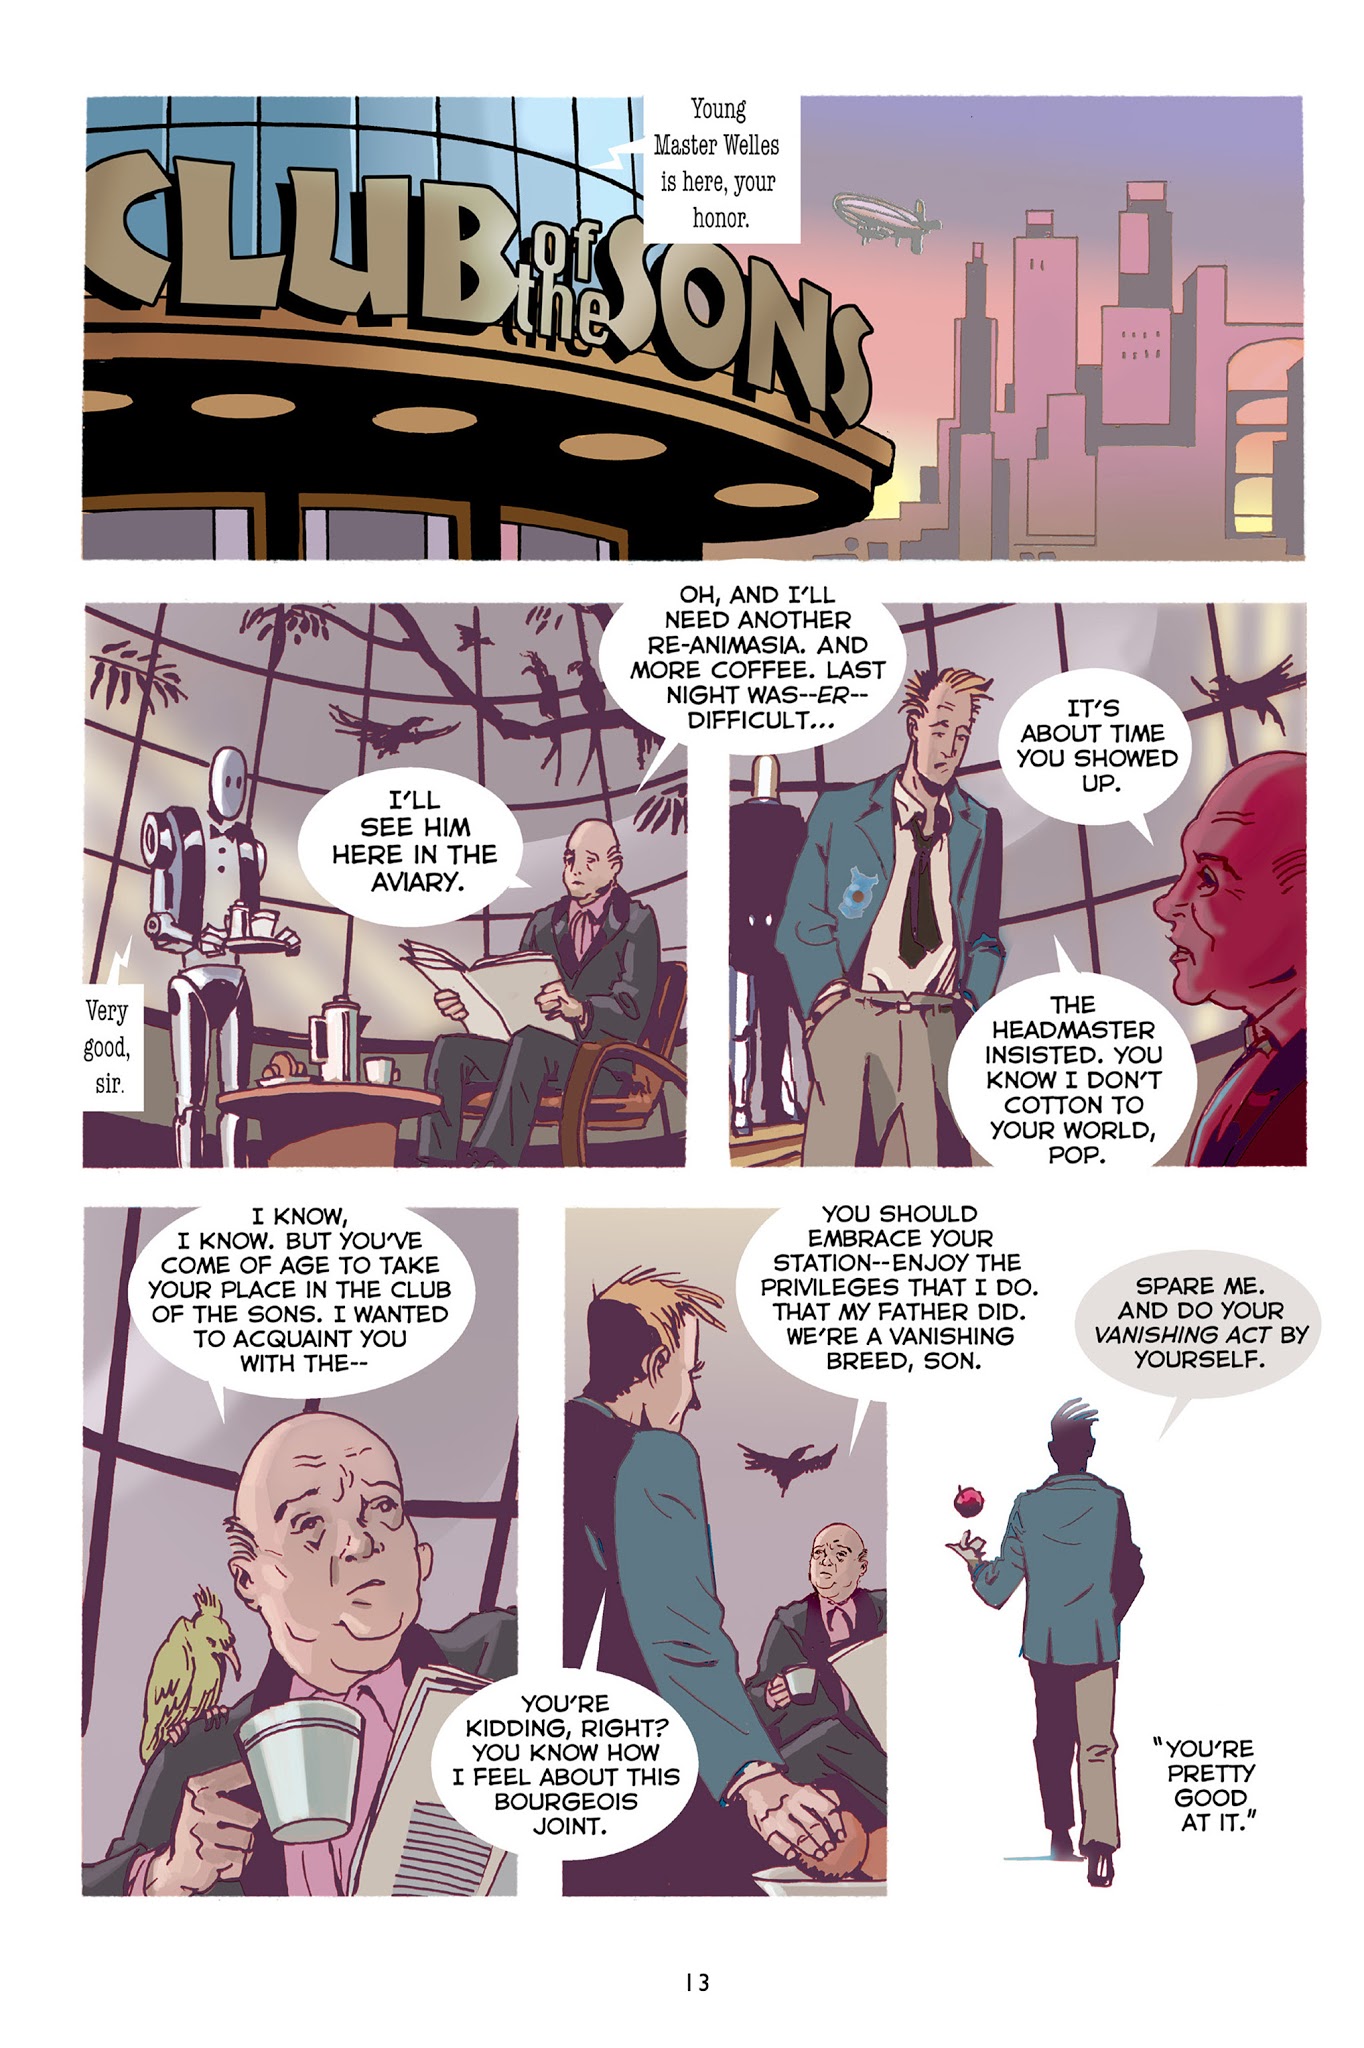 Read online Mister X: Eviction comic -  Issue # TPB - 14